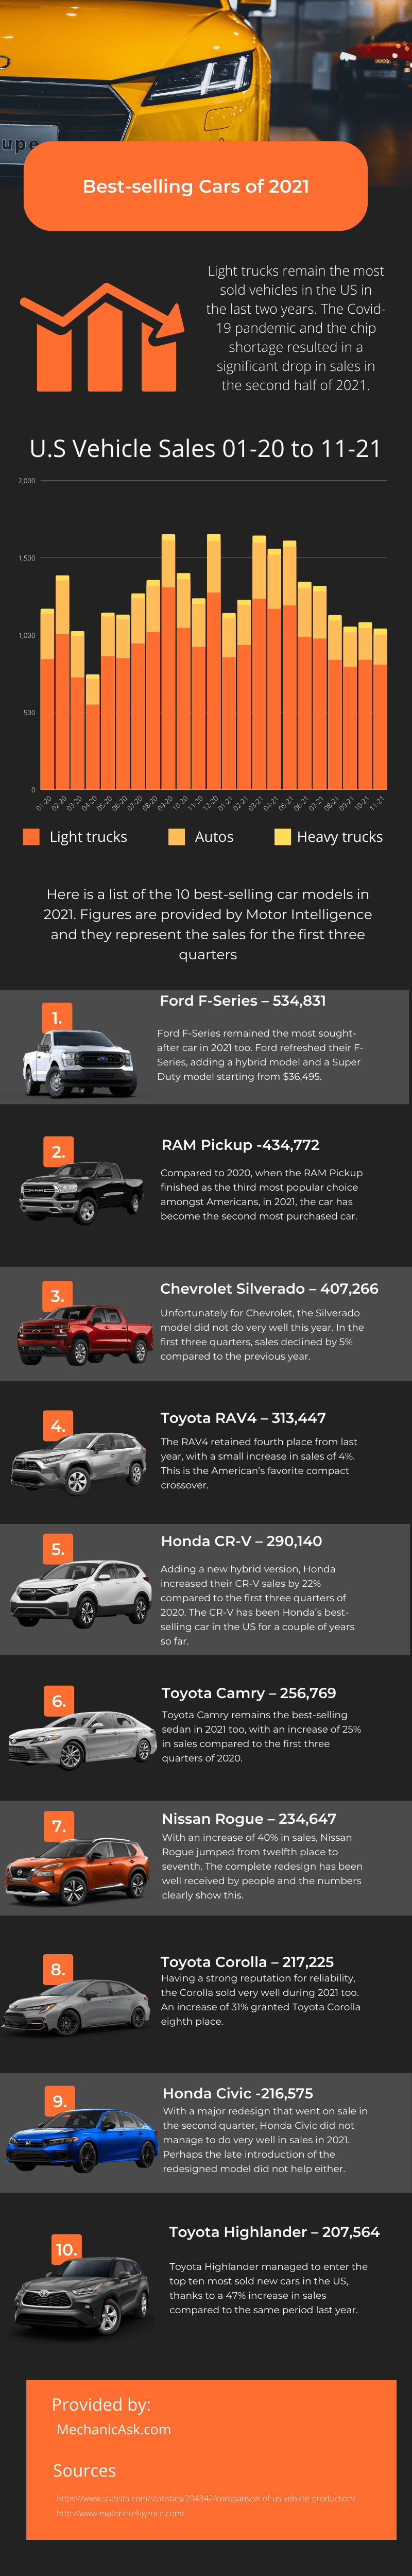 top 10 best selling cars in the US